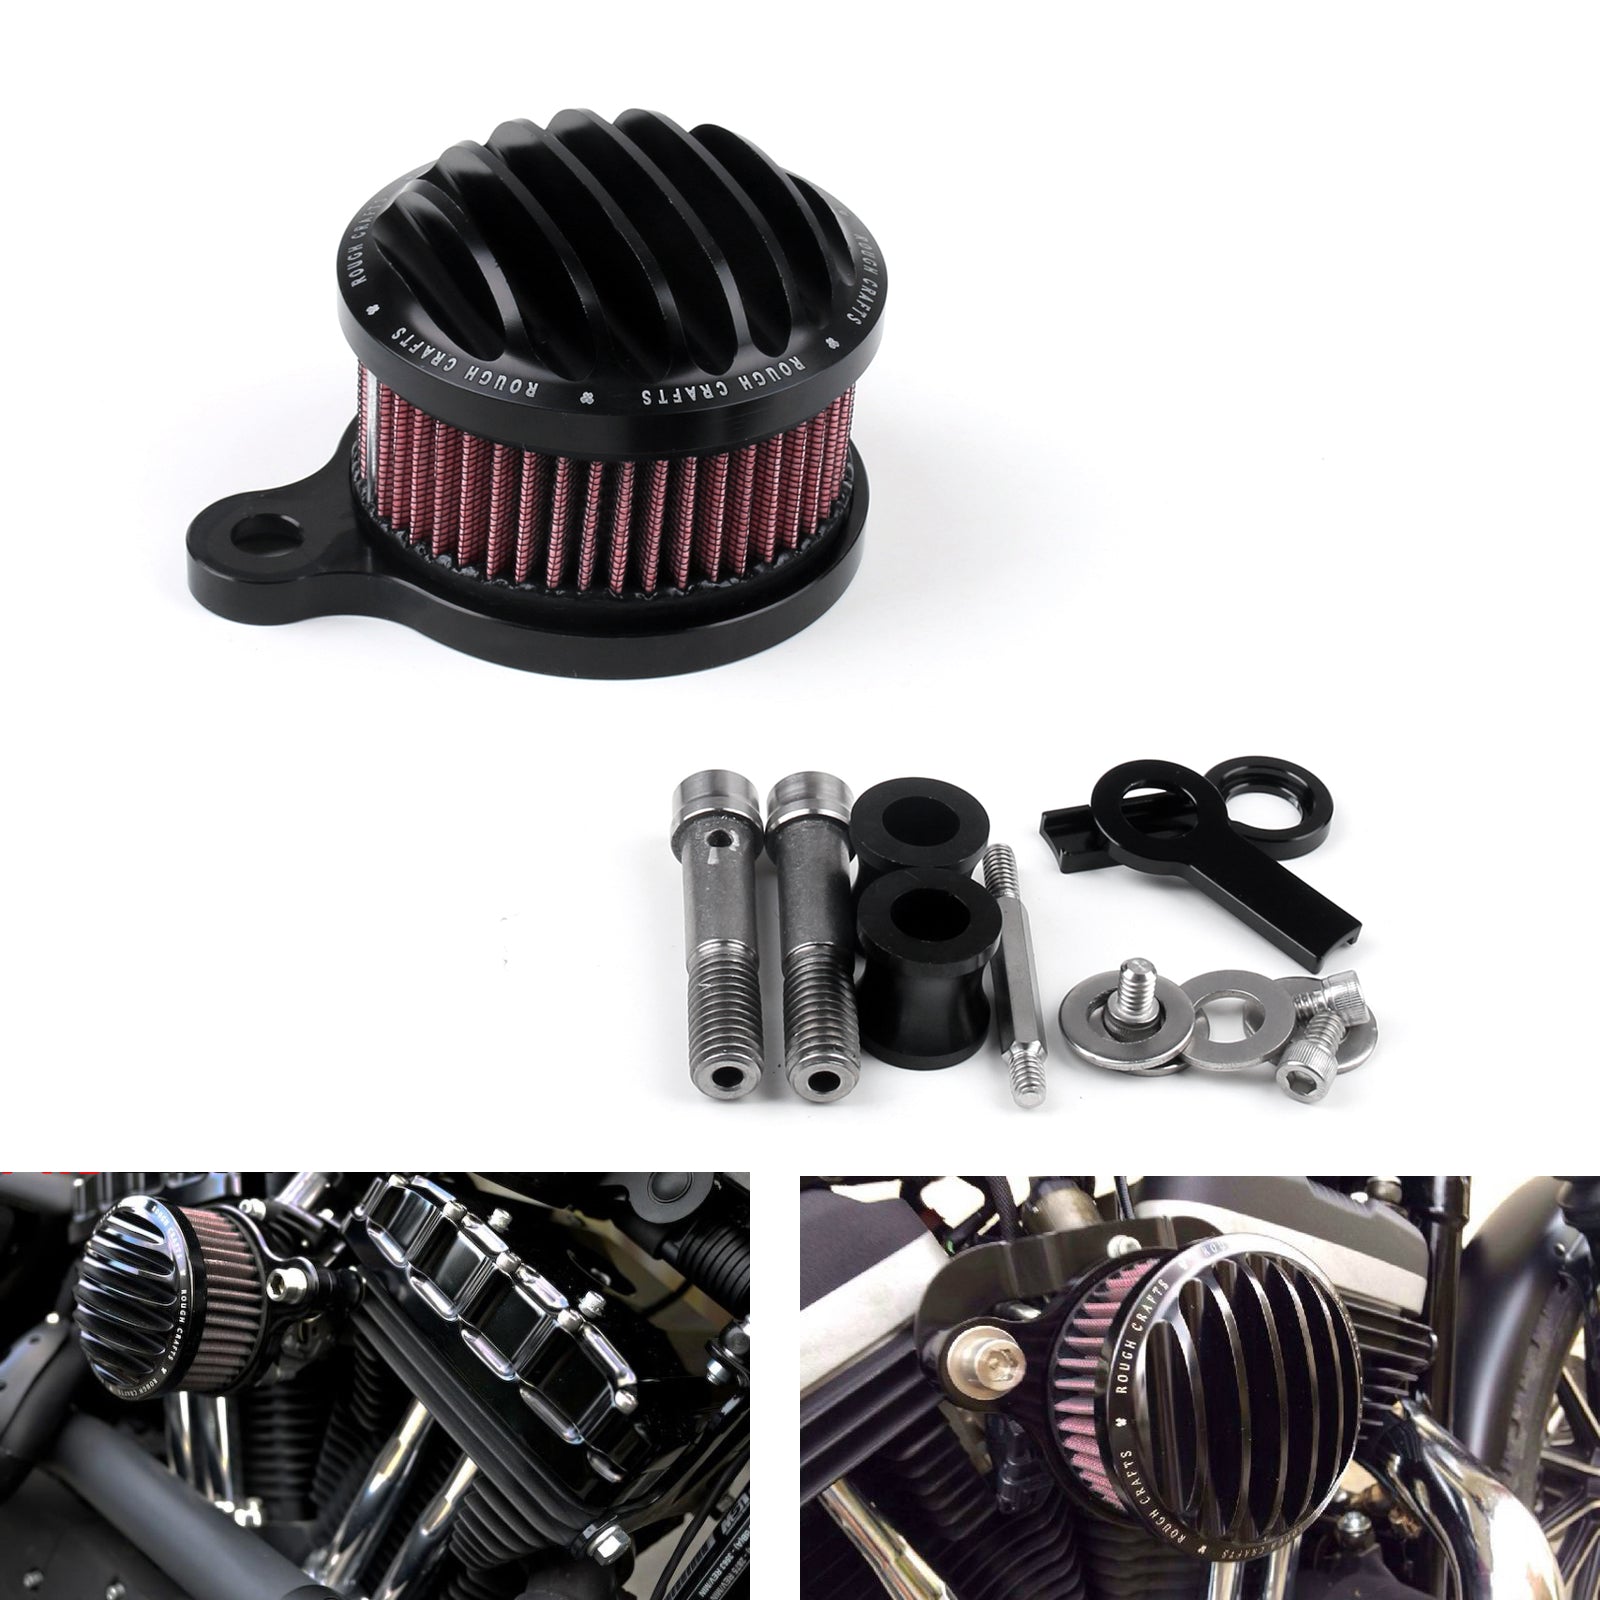 Air Cleaner Intake Filter System Kit for Harley Sportster XL883 XL12 1988-215